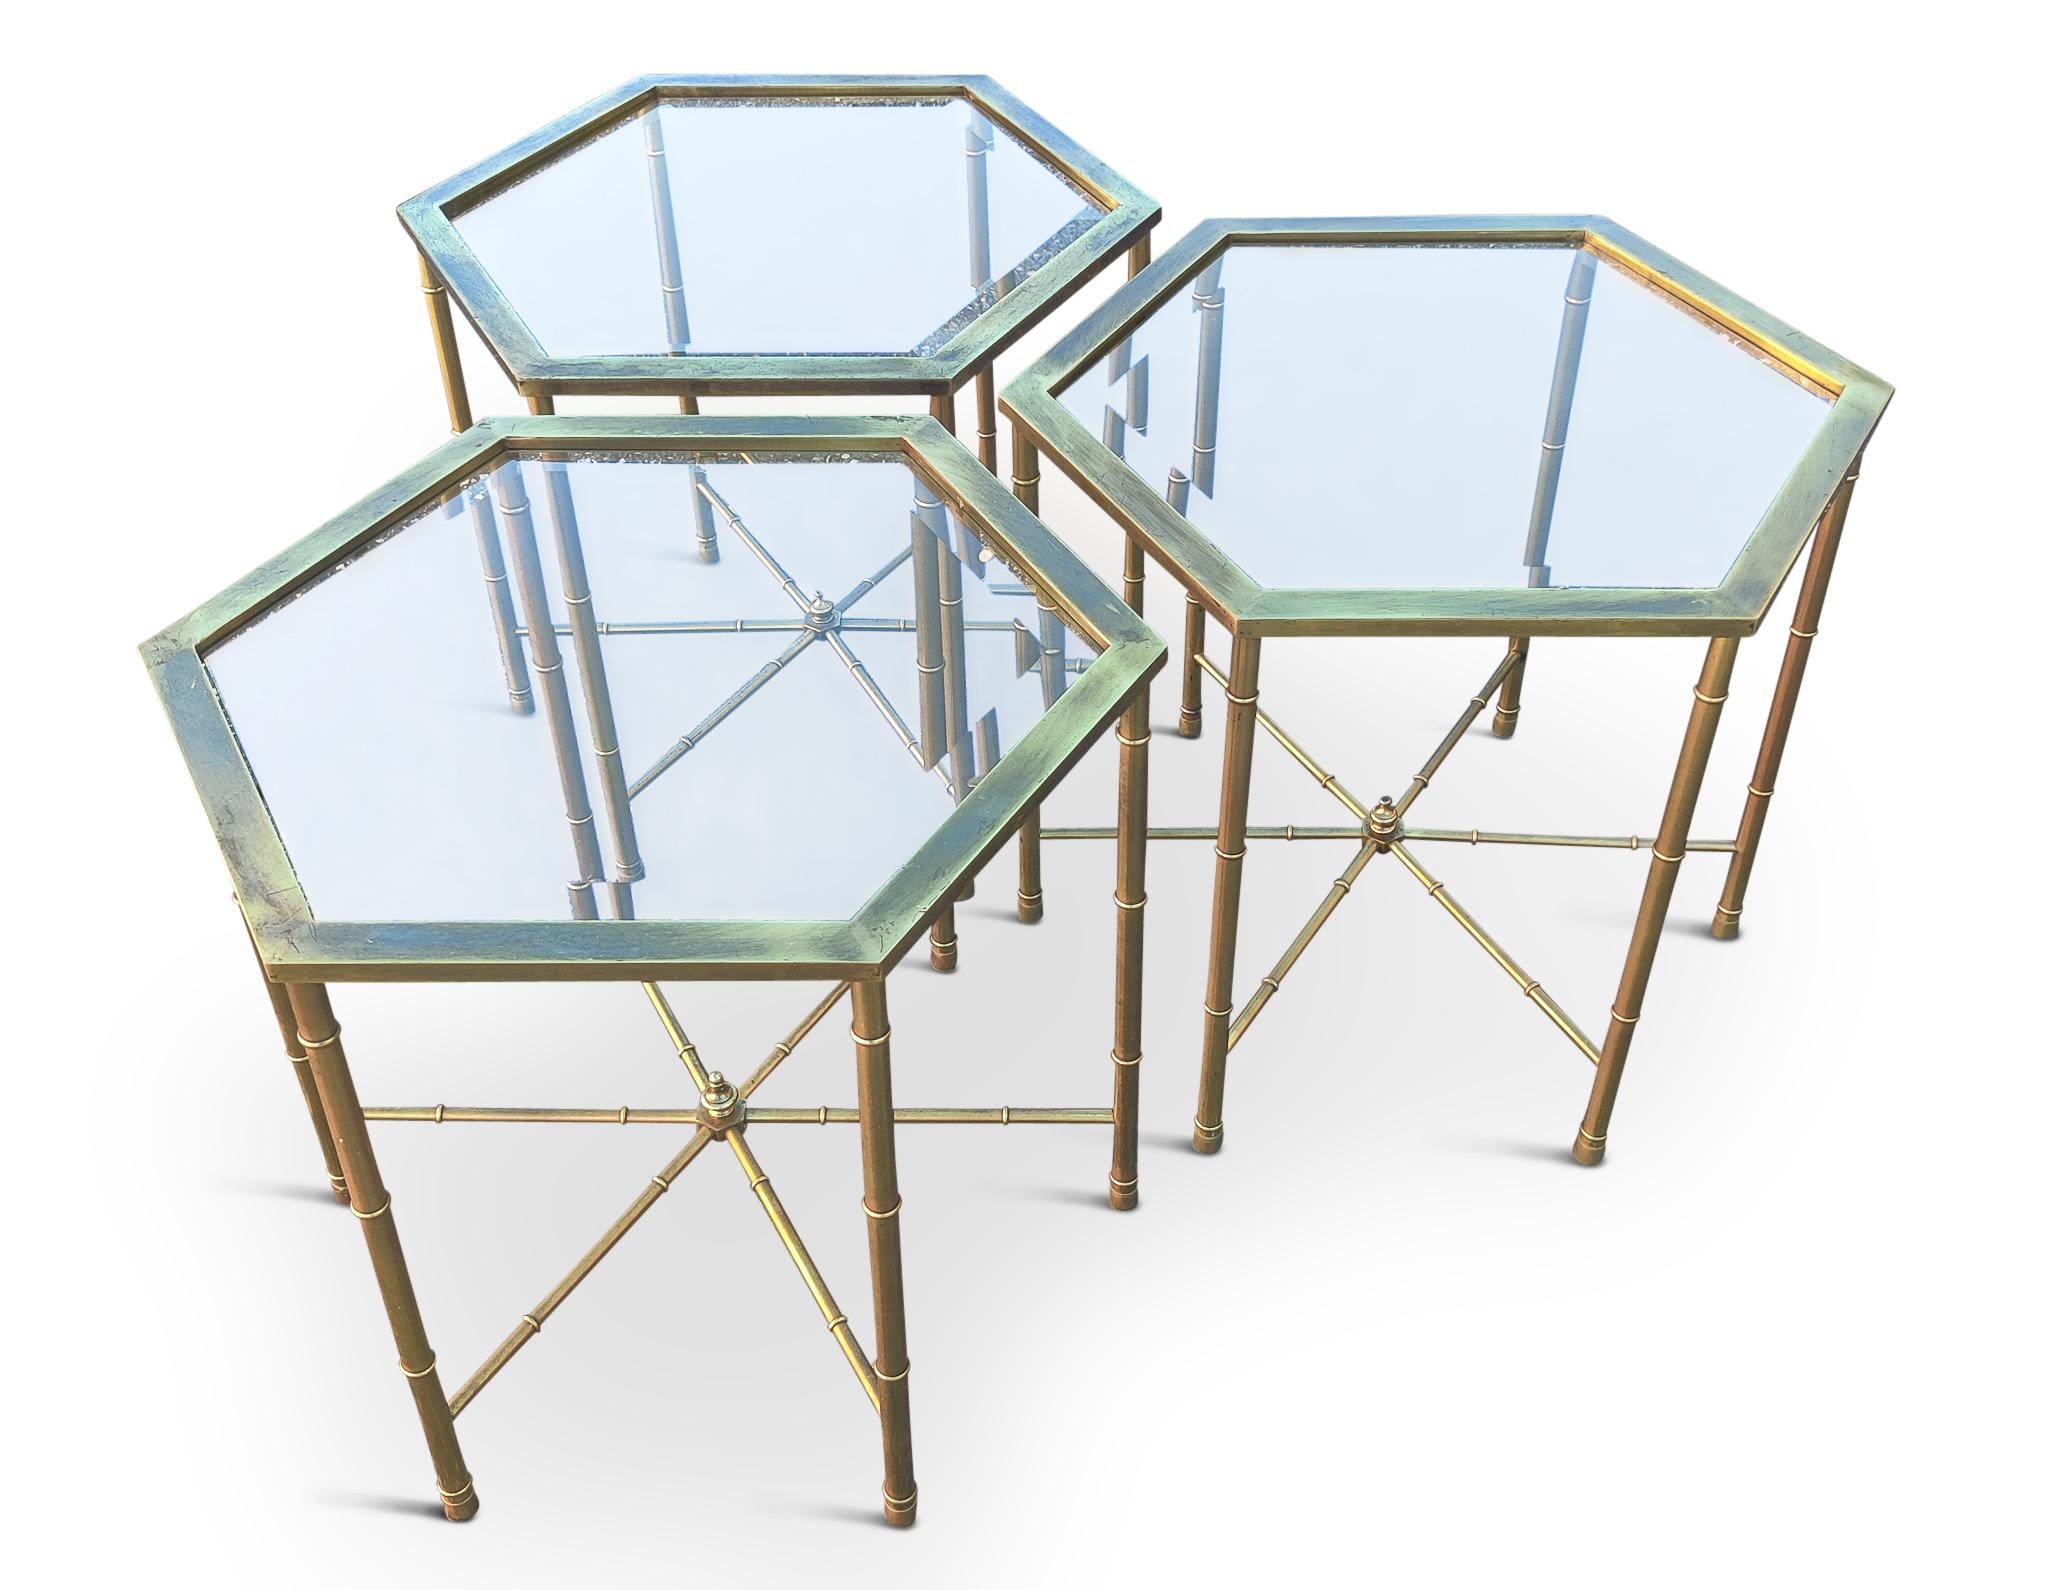 With a base of intricately manufactured brass tubing and precisly fitted beveled glass tops, these three hexagonal tables are a great addition to any modern home. The brass is consistent, bright, and feels very secure and well built. The glass tops